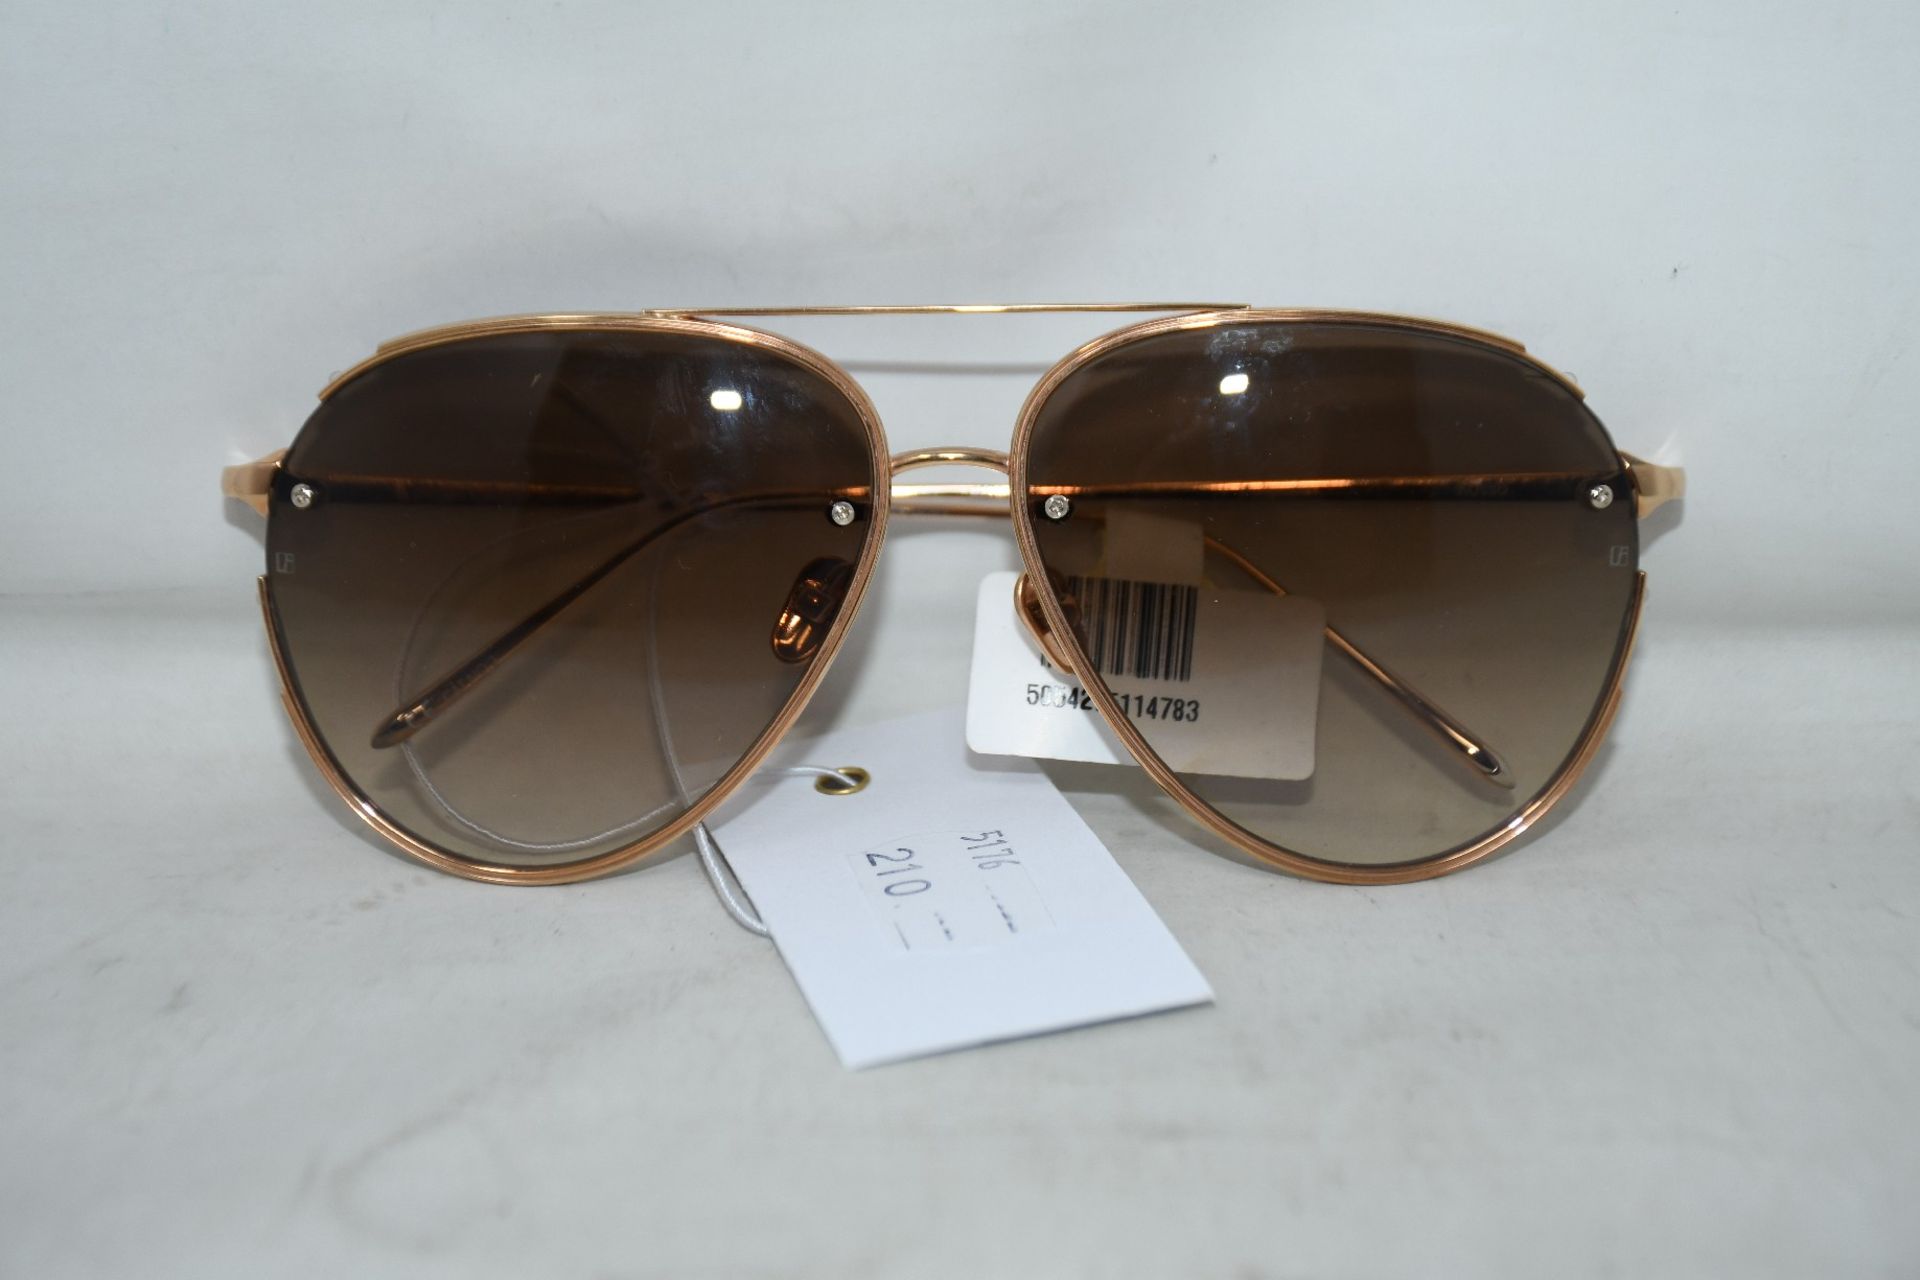 A pair of as new Linda Farrow Russo sunglasses (RRP £665 - no case).